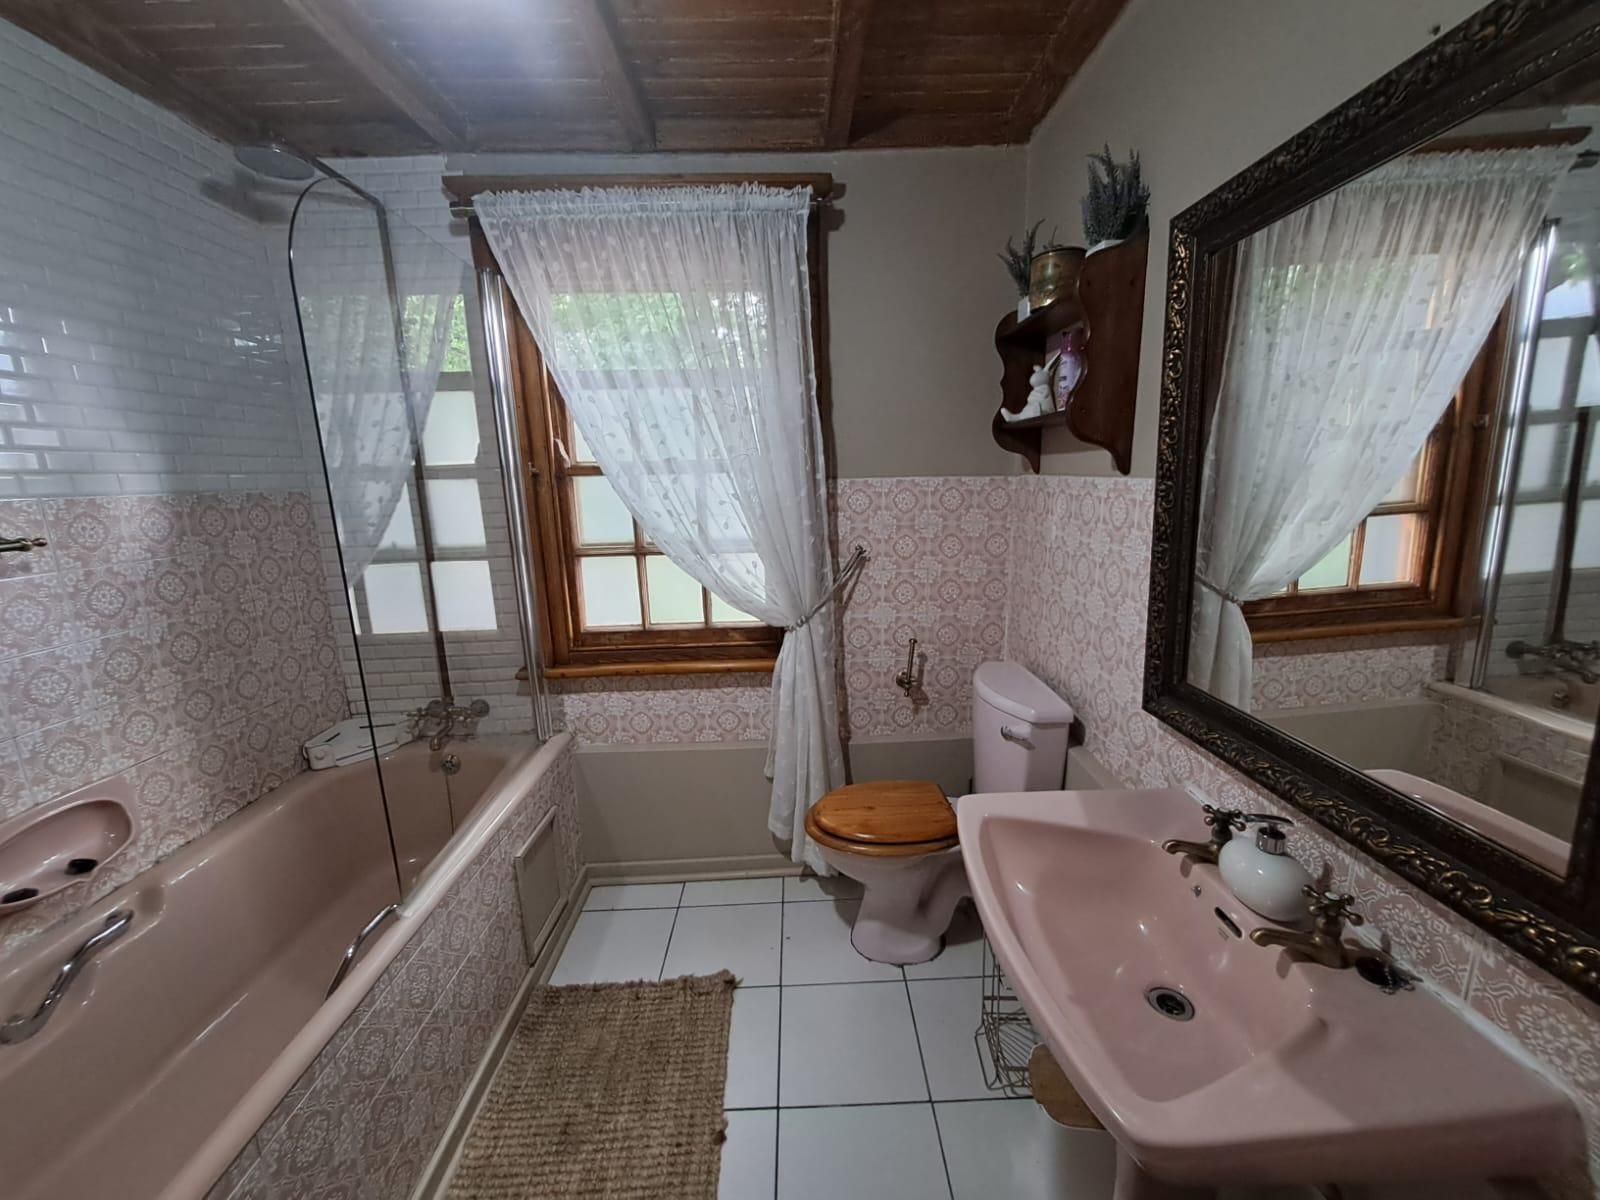 Pandora S Guesthouse Bethlehem Free State South Africa Unsaturated, Bathroom